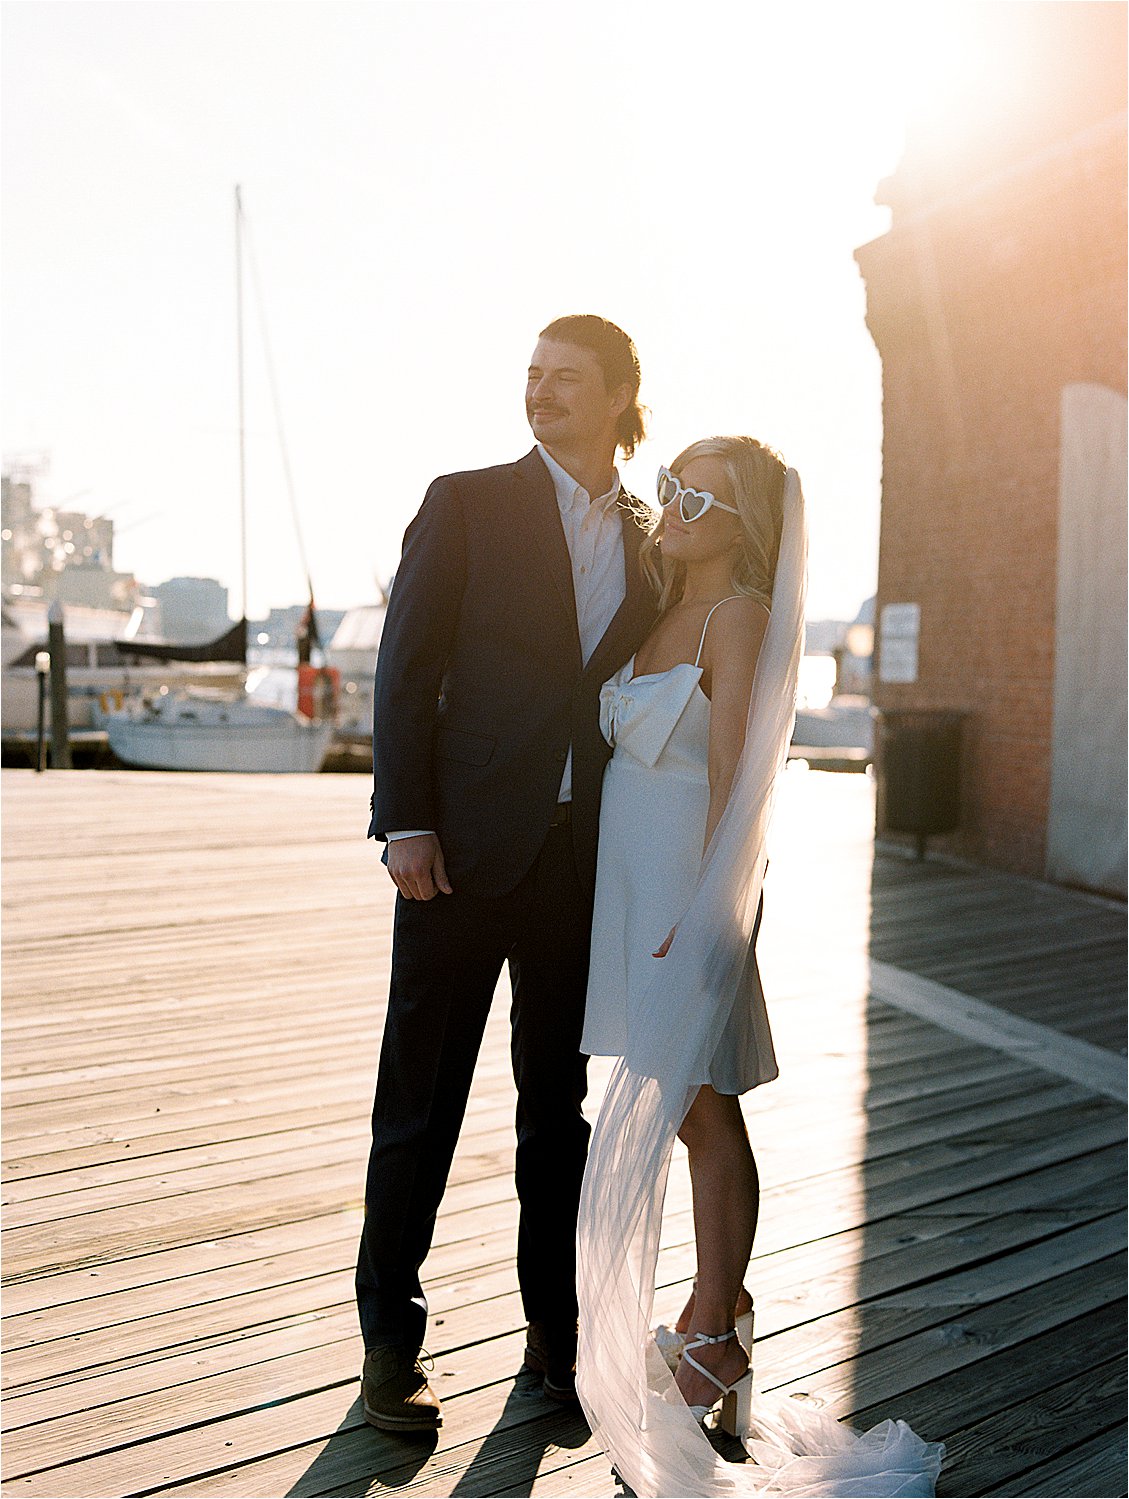 Golden hour engagement session in Fells Point with film wedding photographer, Renee Hollingshead